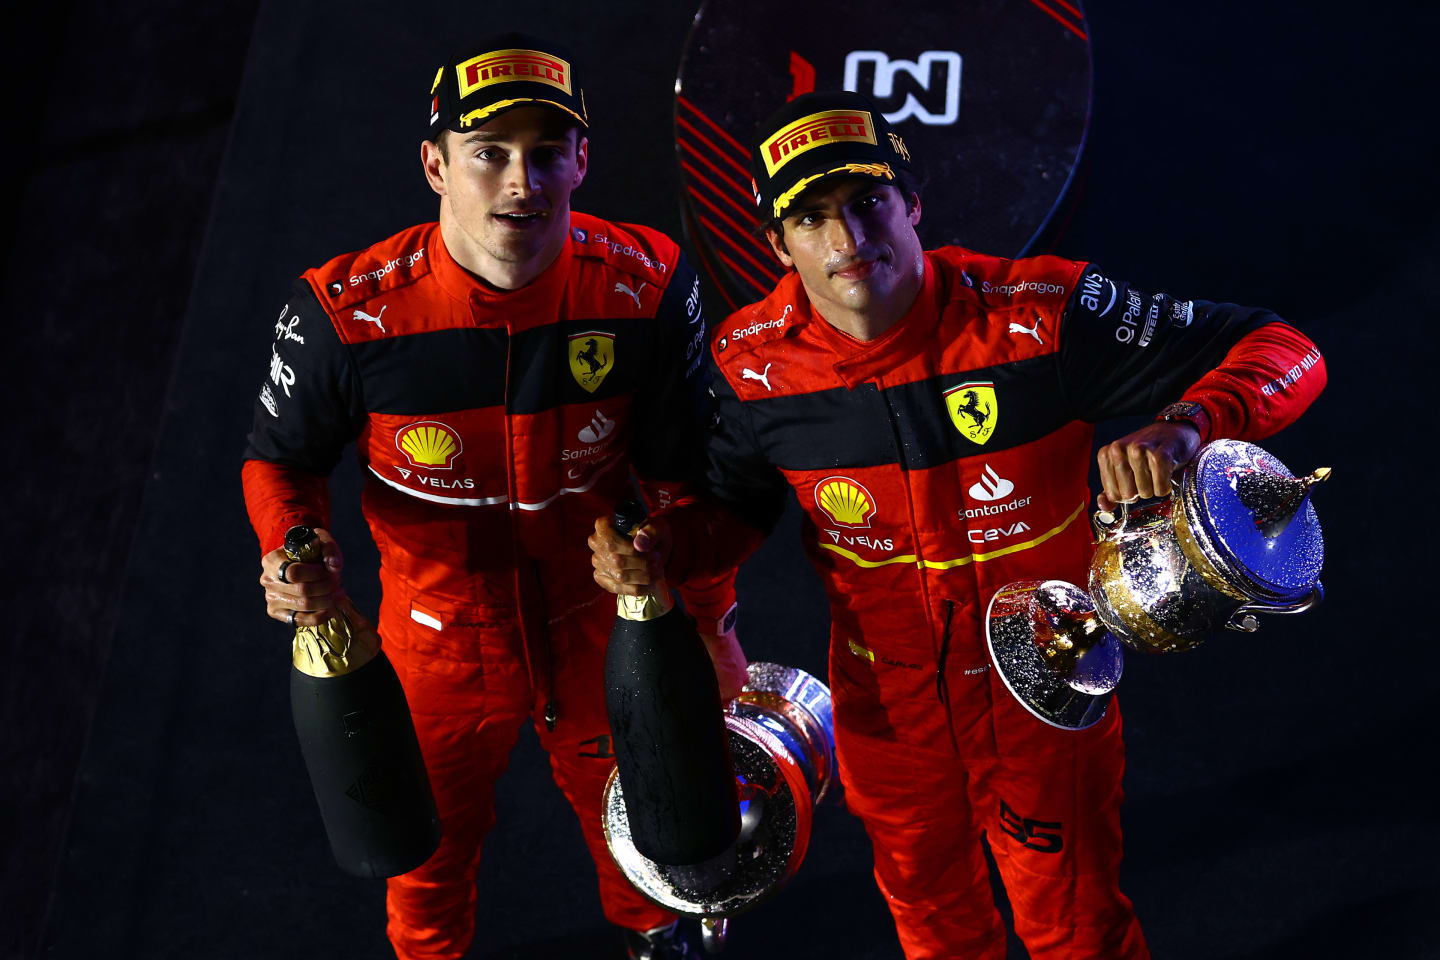 BAHRAIN, BAHRAIN - MARCH 20: Race winner Charles Leclerc of Monaco and Ferrari and Second placed